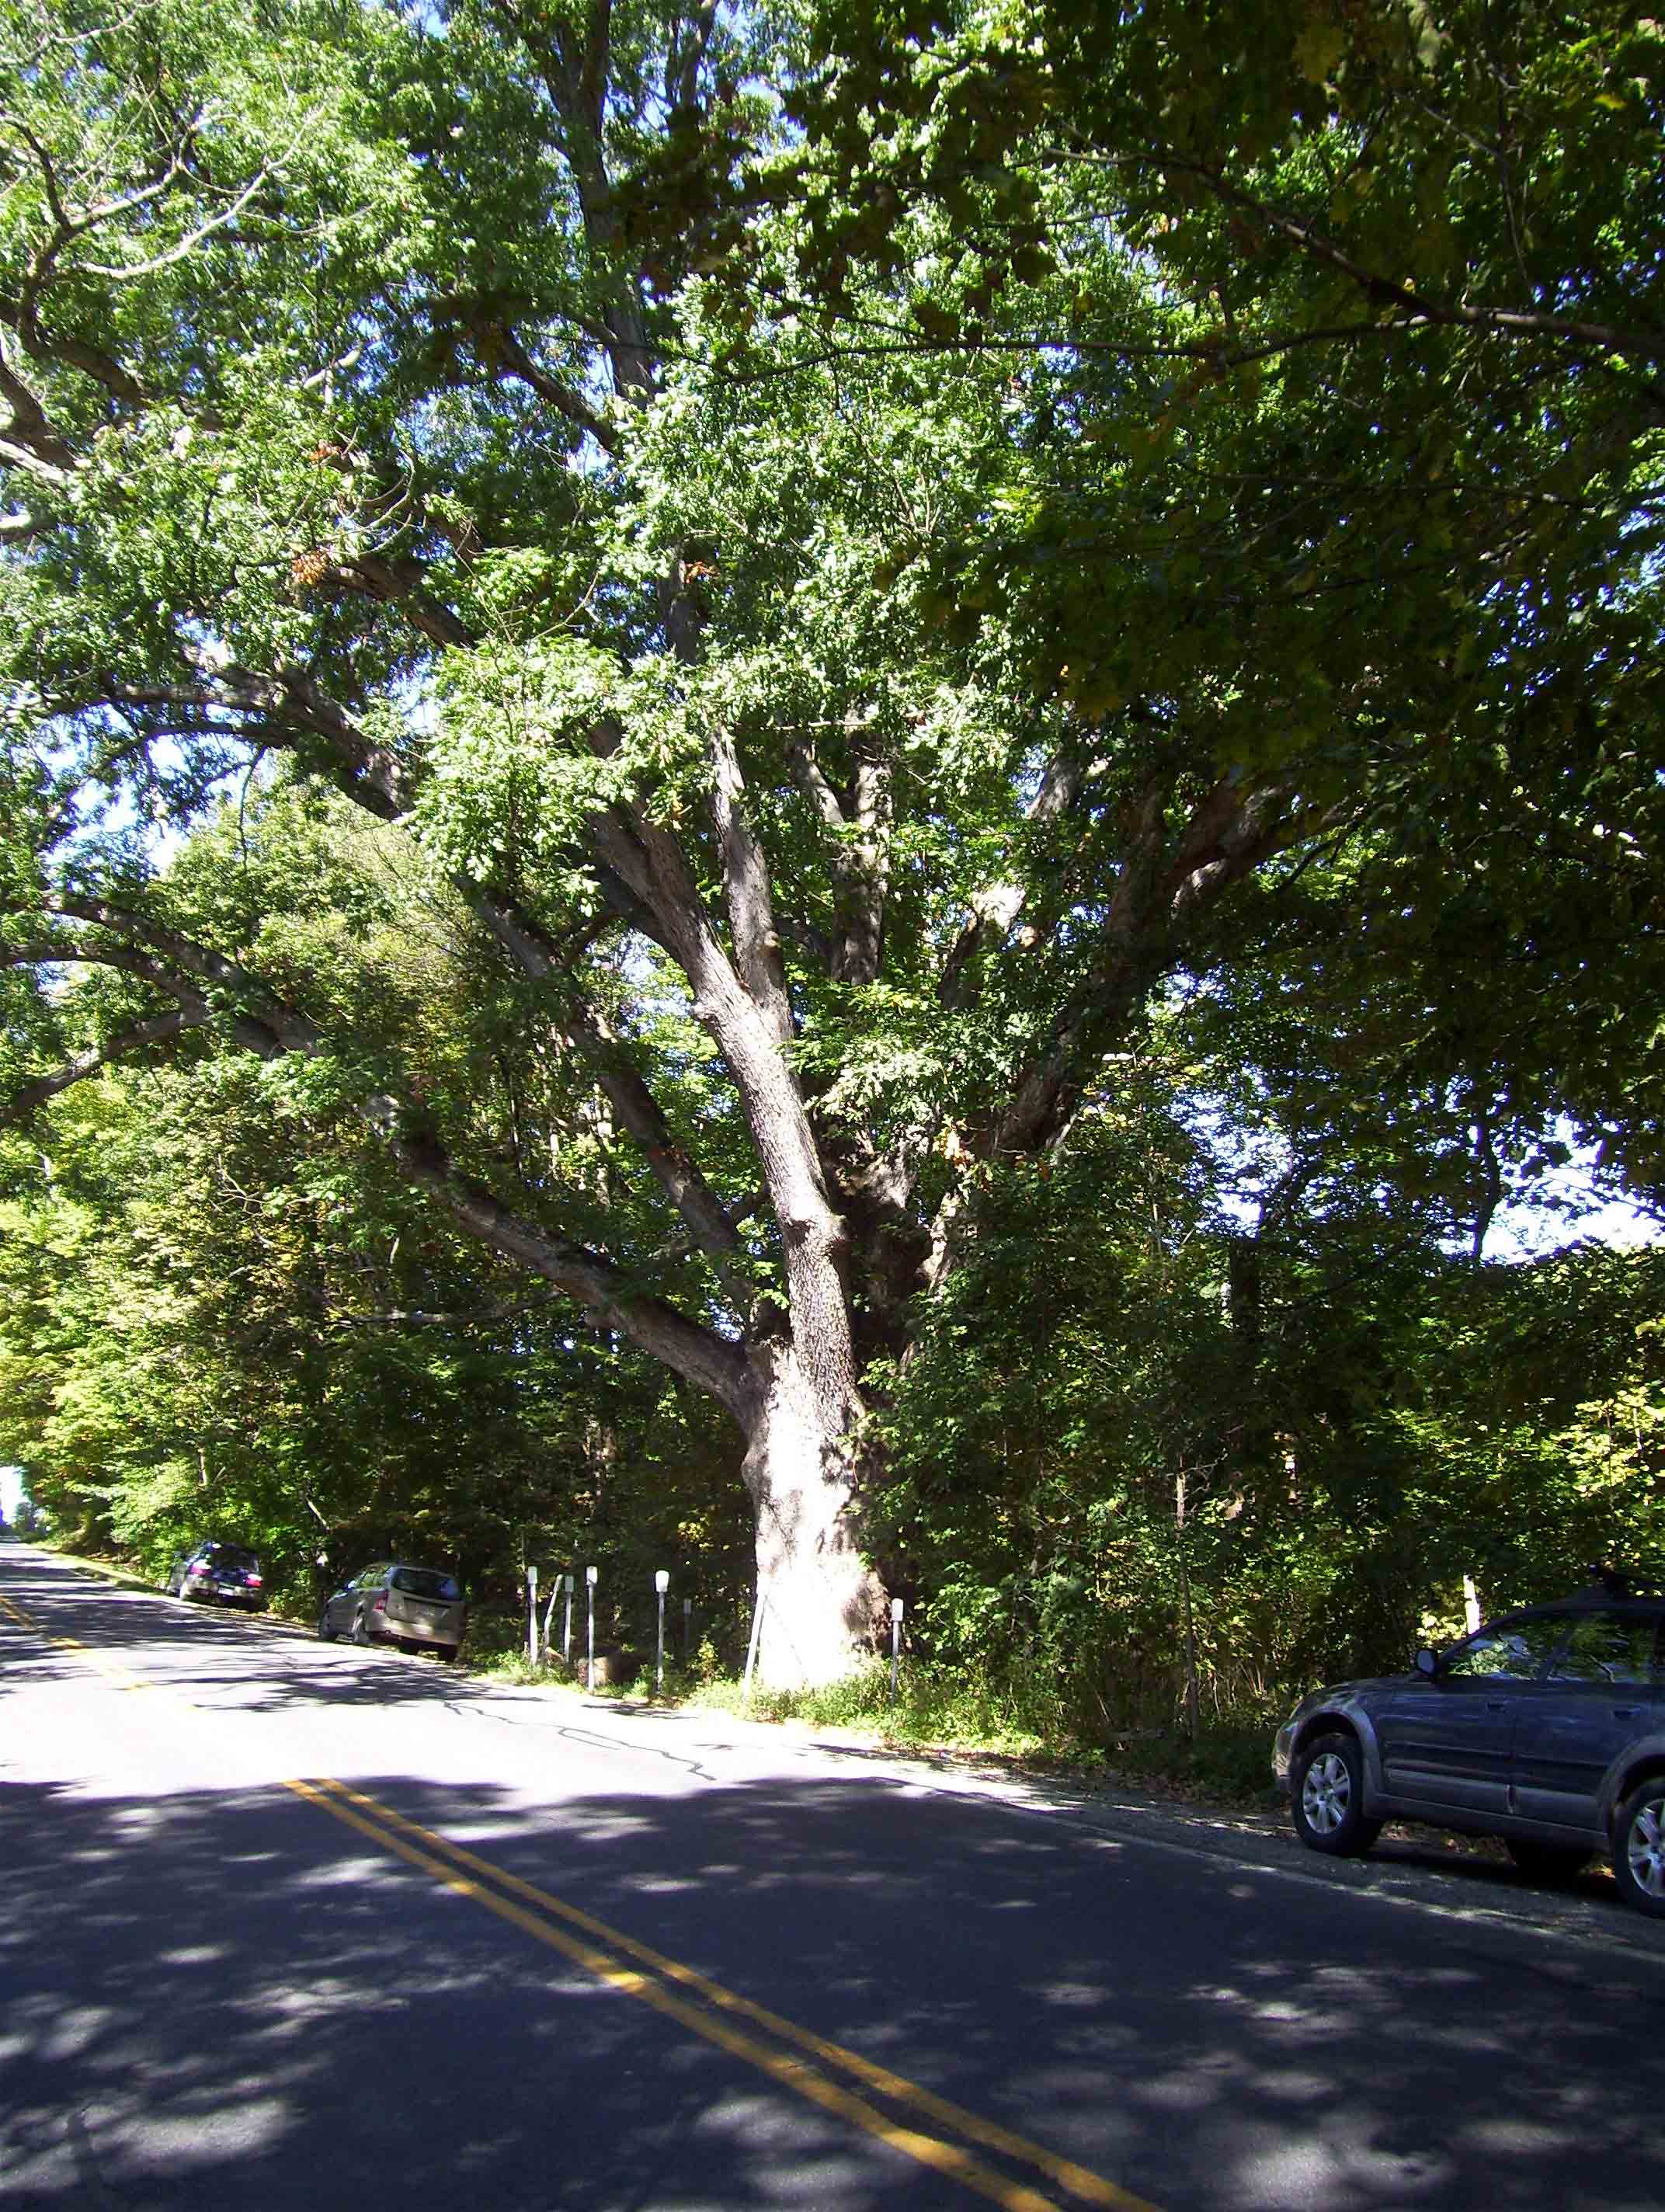 mm 2.4 Another view of the Dover Oak. You can see some of the roadside parking.  Courtesy dlcul@conncoll.edu